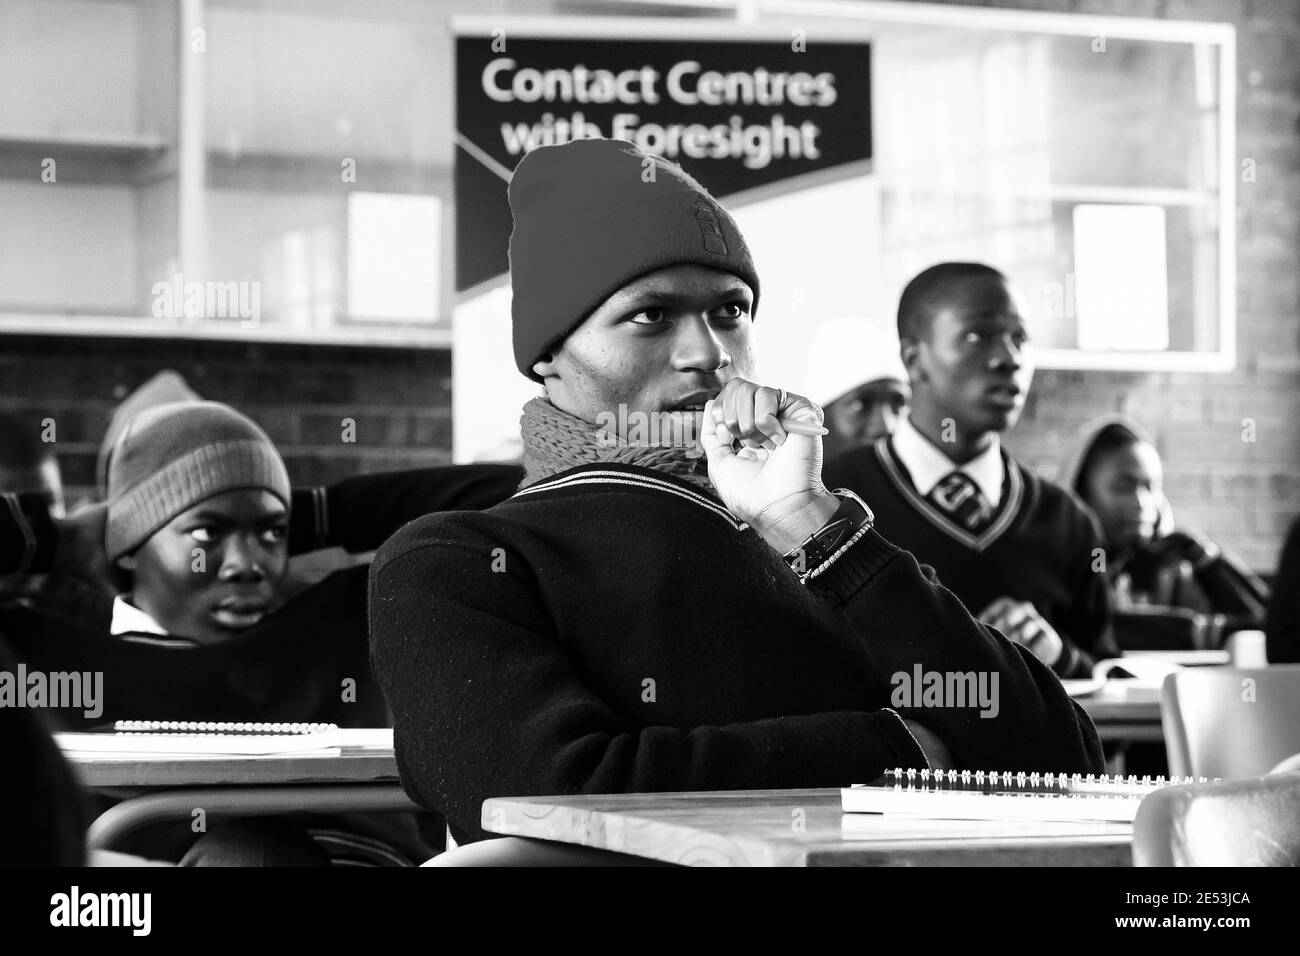 JOHANNESBURG, SOUTH AFRICA - Jan 05, 2021: Johannesburg, South Africa - July 29 2011: African High School Children in Classroom Lesson Stock Photo